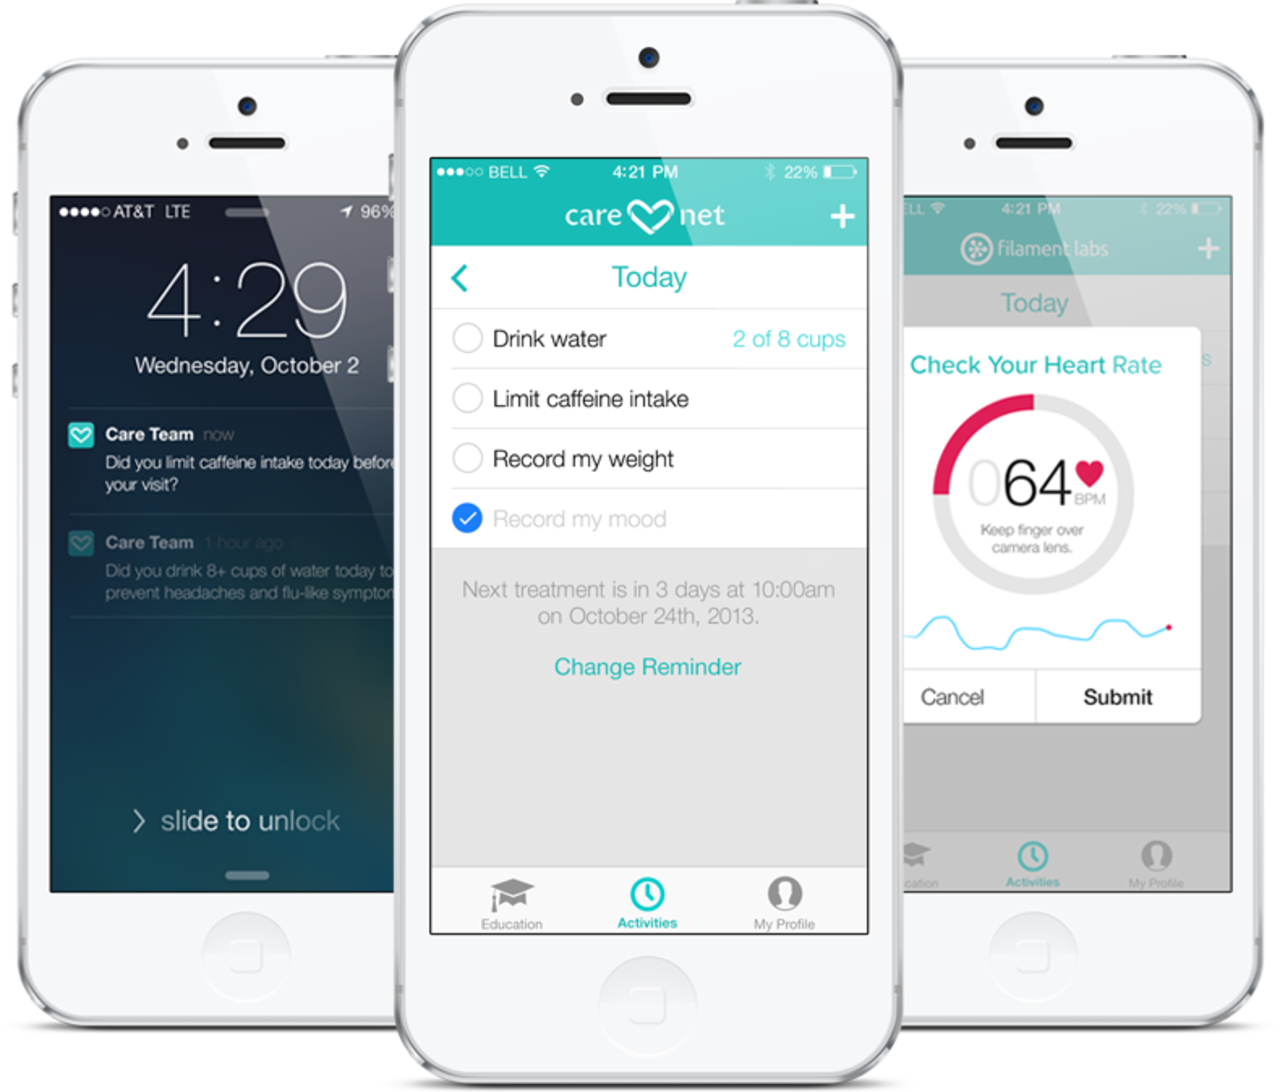 The Filament Labs app reminds users about their doctors' advice as well as helps keep the lines of communication open between patients and health professionals.